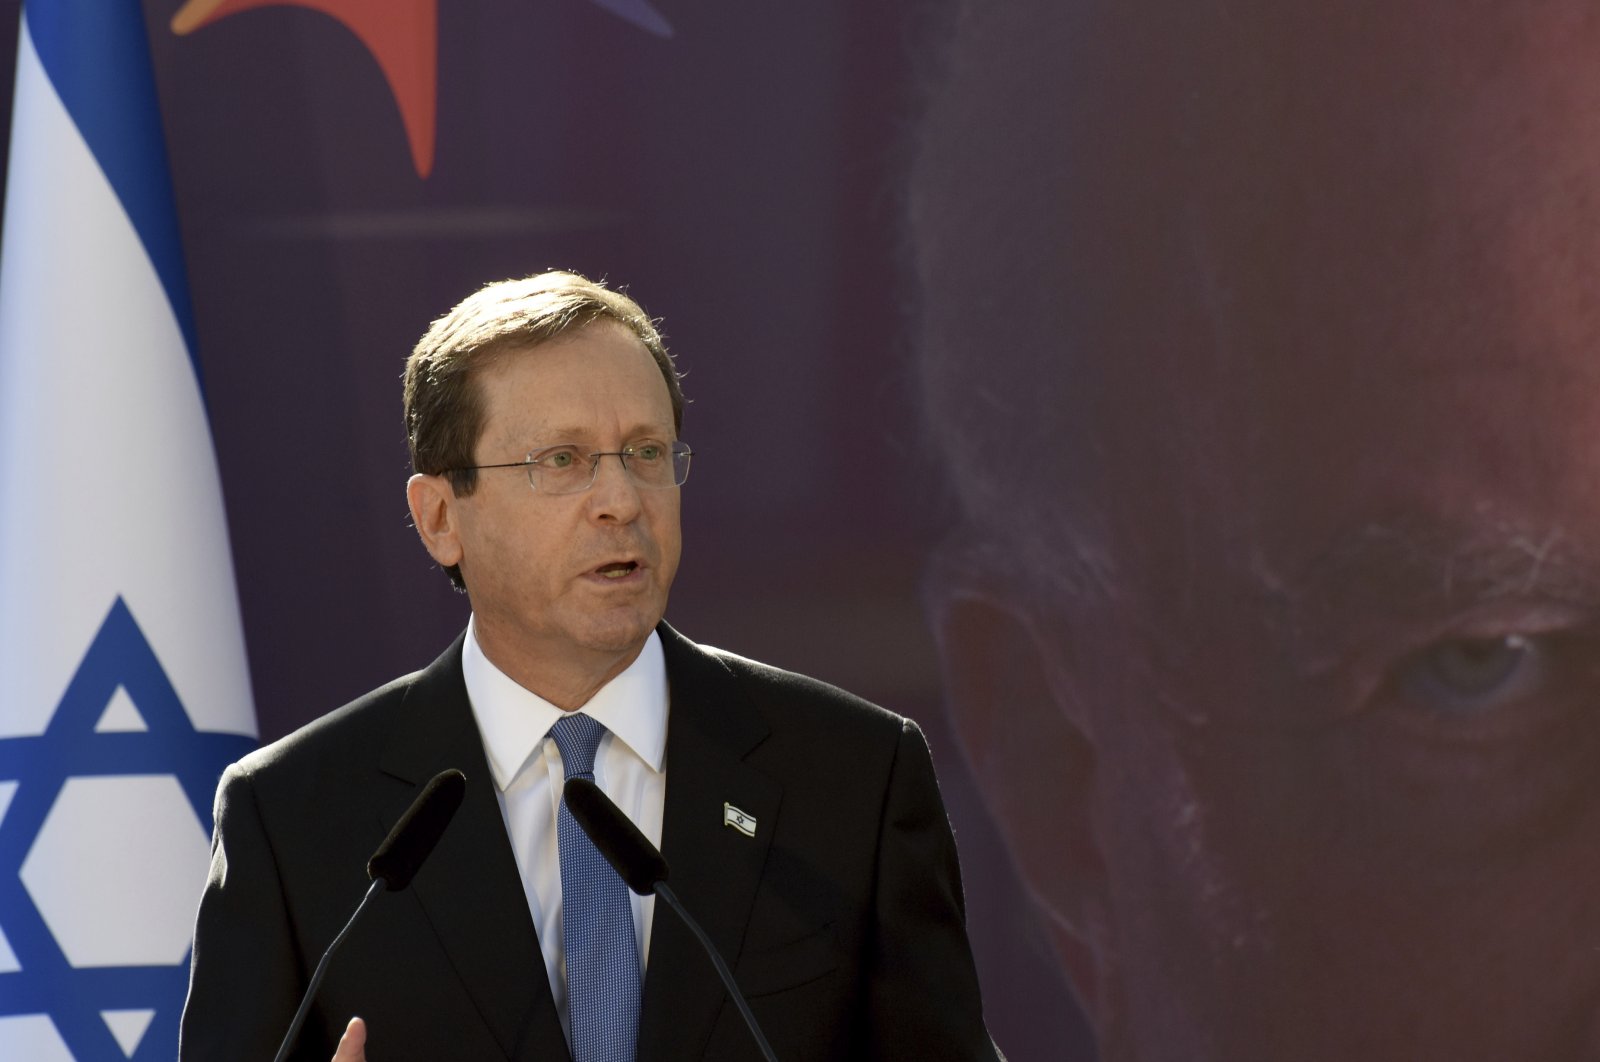 Israeli President Isaac Herzog speaks at the state memorial ceremony for the late Prime Minister Yitzhak Rabin at the Mt. Herzl Cemetery in Jerusalem, Monday, Oct. 18, 2021. (AP File Photo)